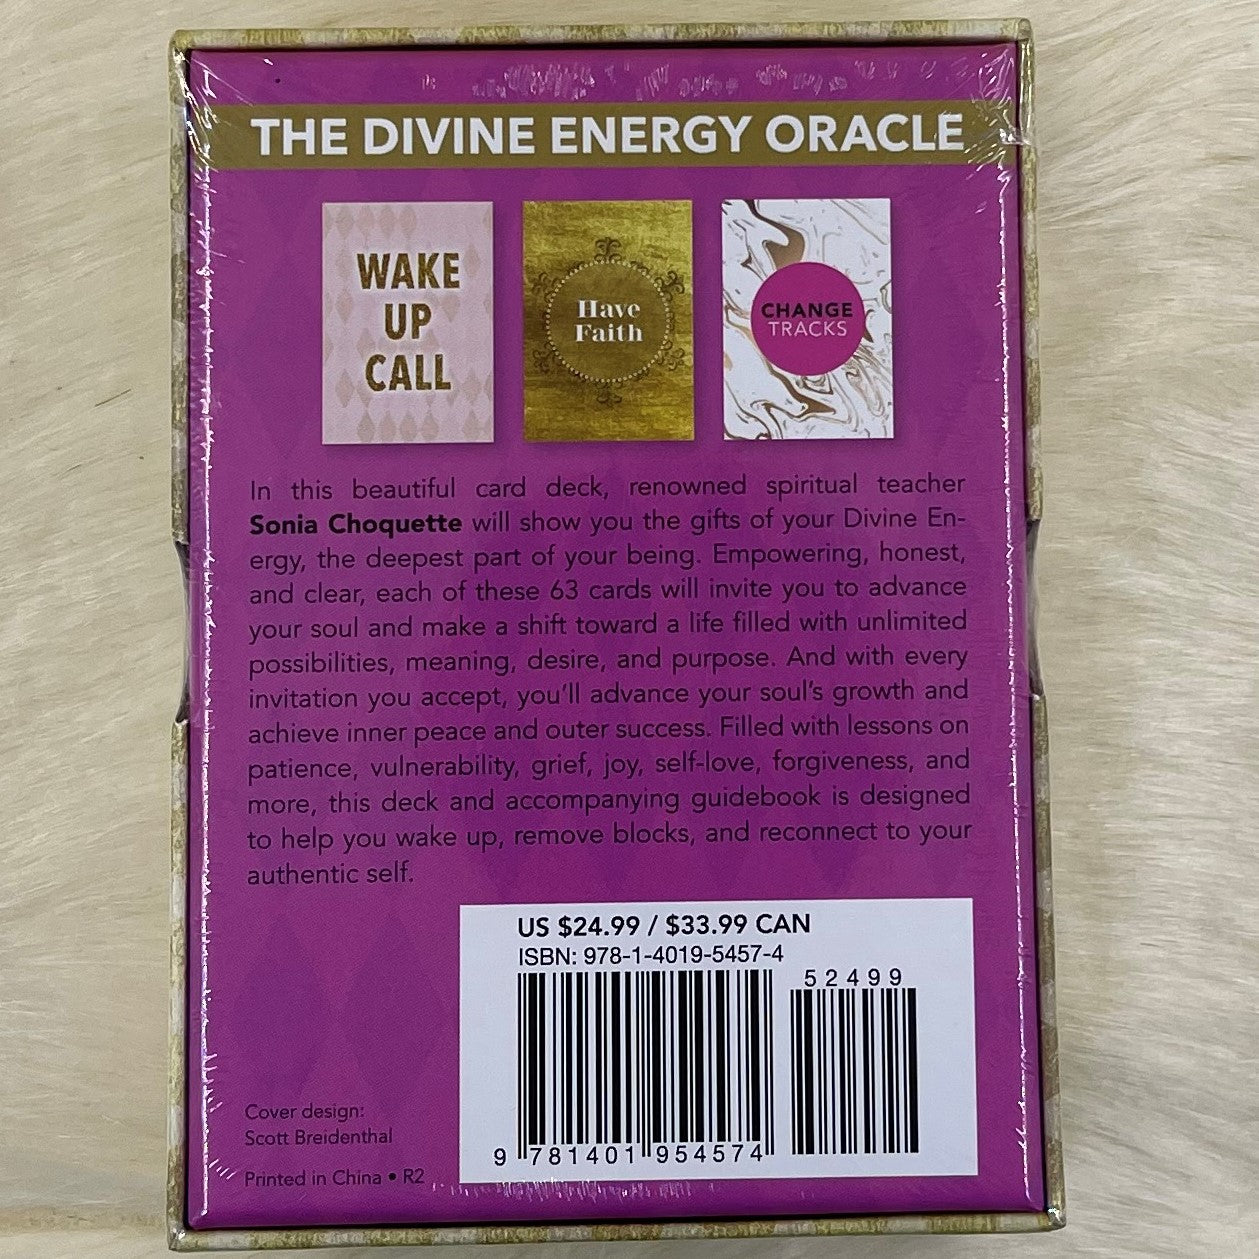 The Divine Energy Oracle.